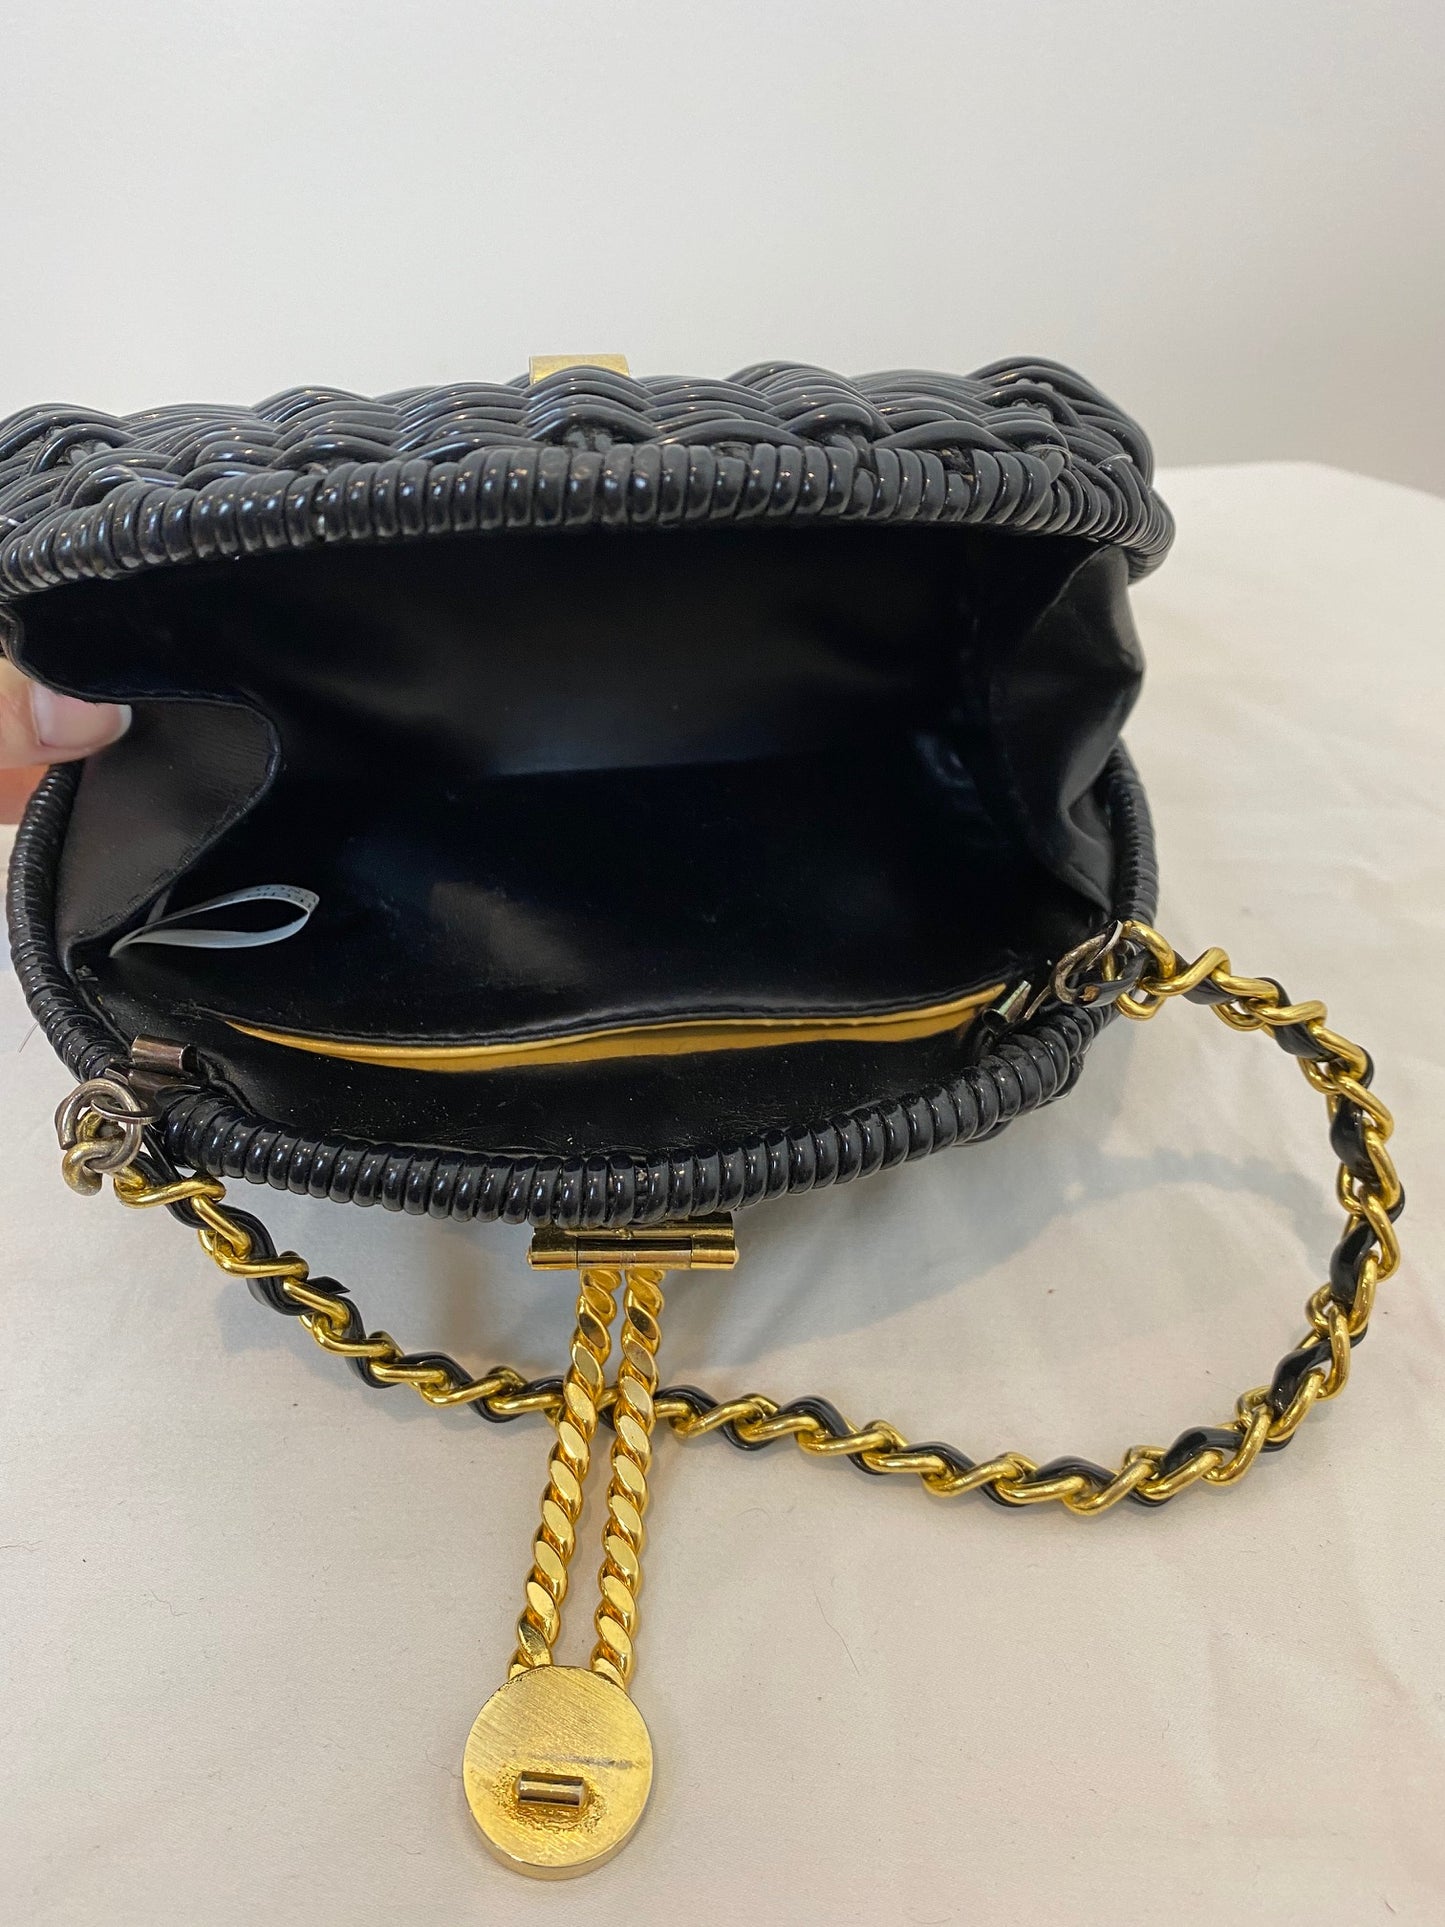 Black Wicker Purse with Gold Hardware